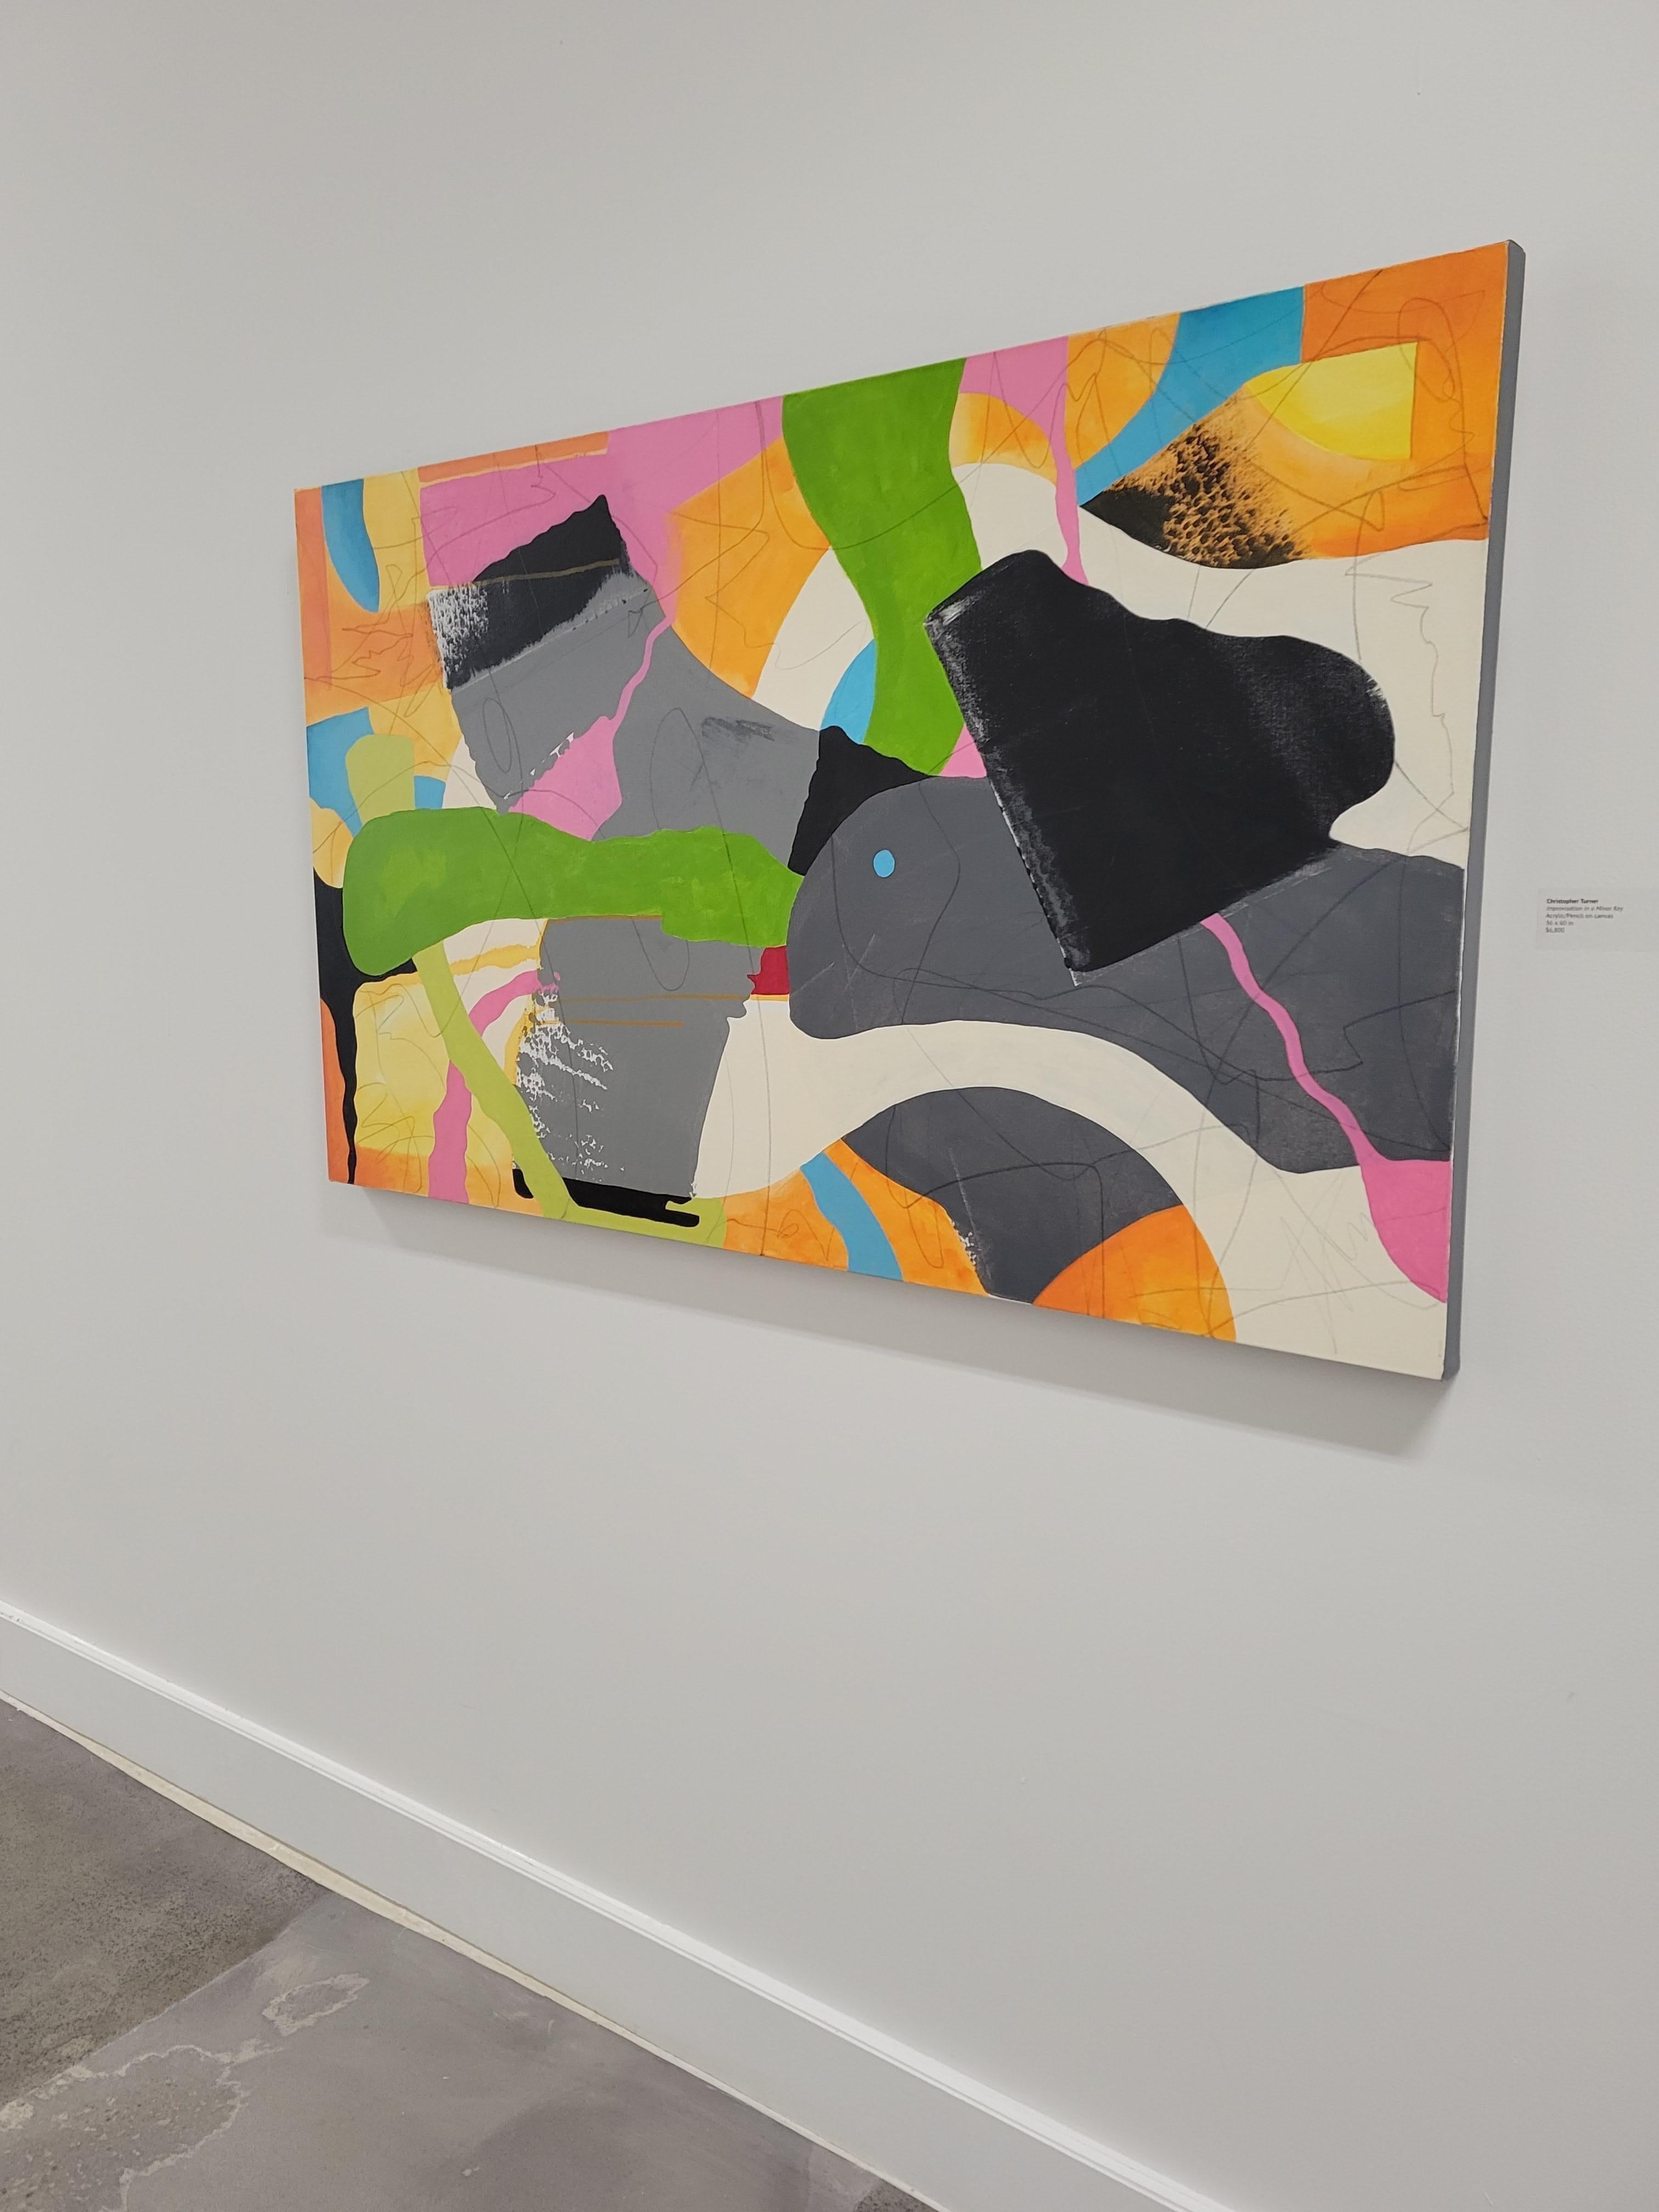 Christopher Turner's artistic compositions contain loose organic backgrounds with more defined linear bars of color laid over them, sometimes with paint and sometimes with fabrics such as canvas, burlap and denim. The dichotomy between these two